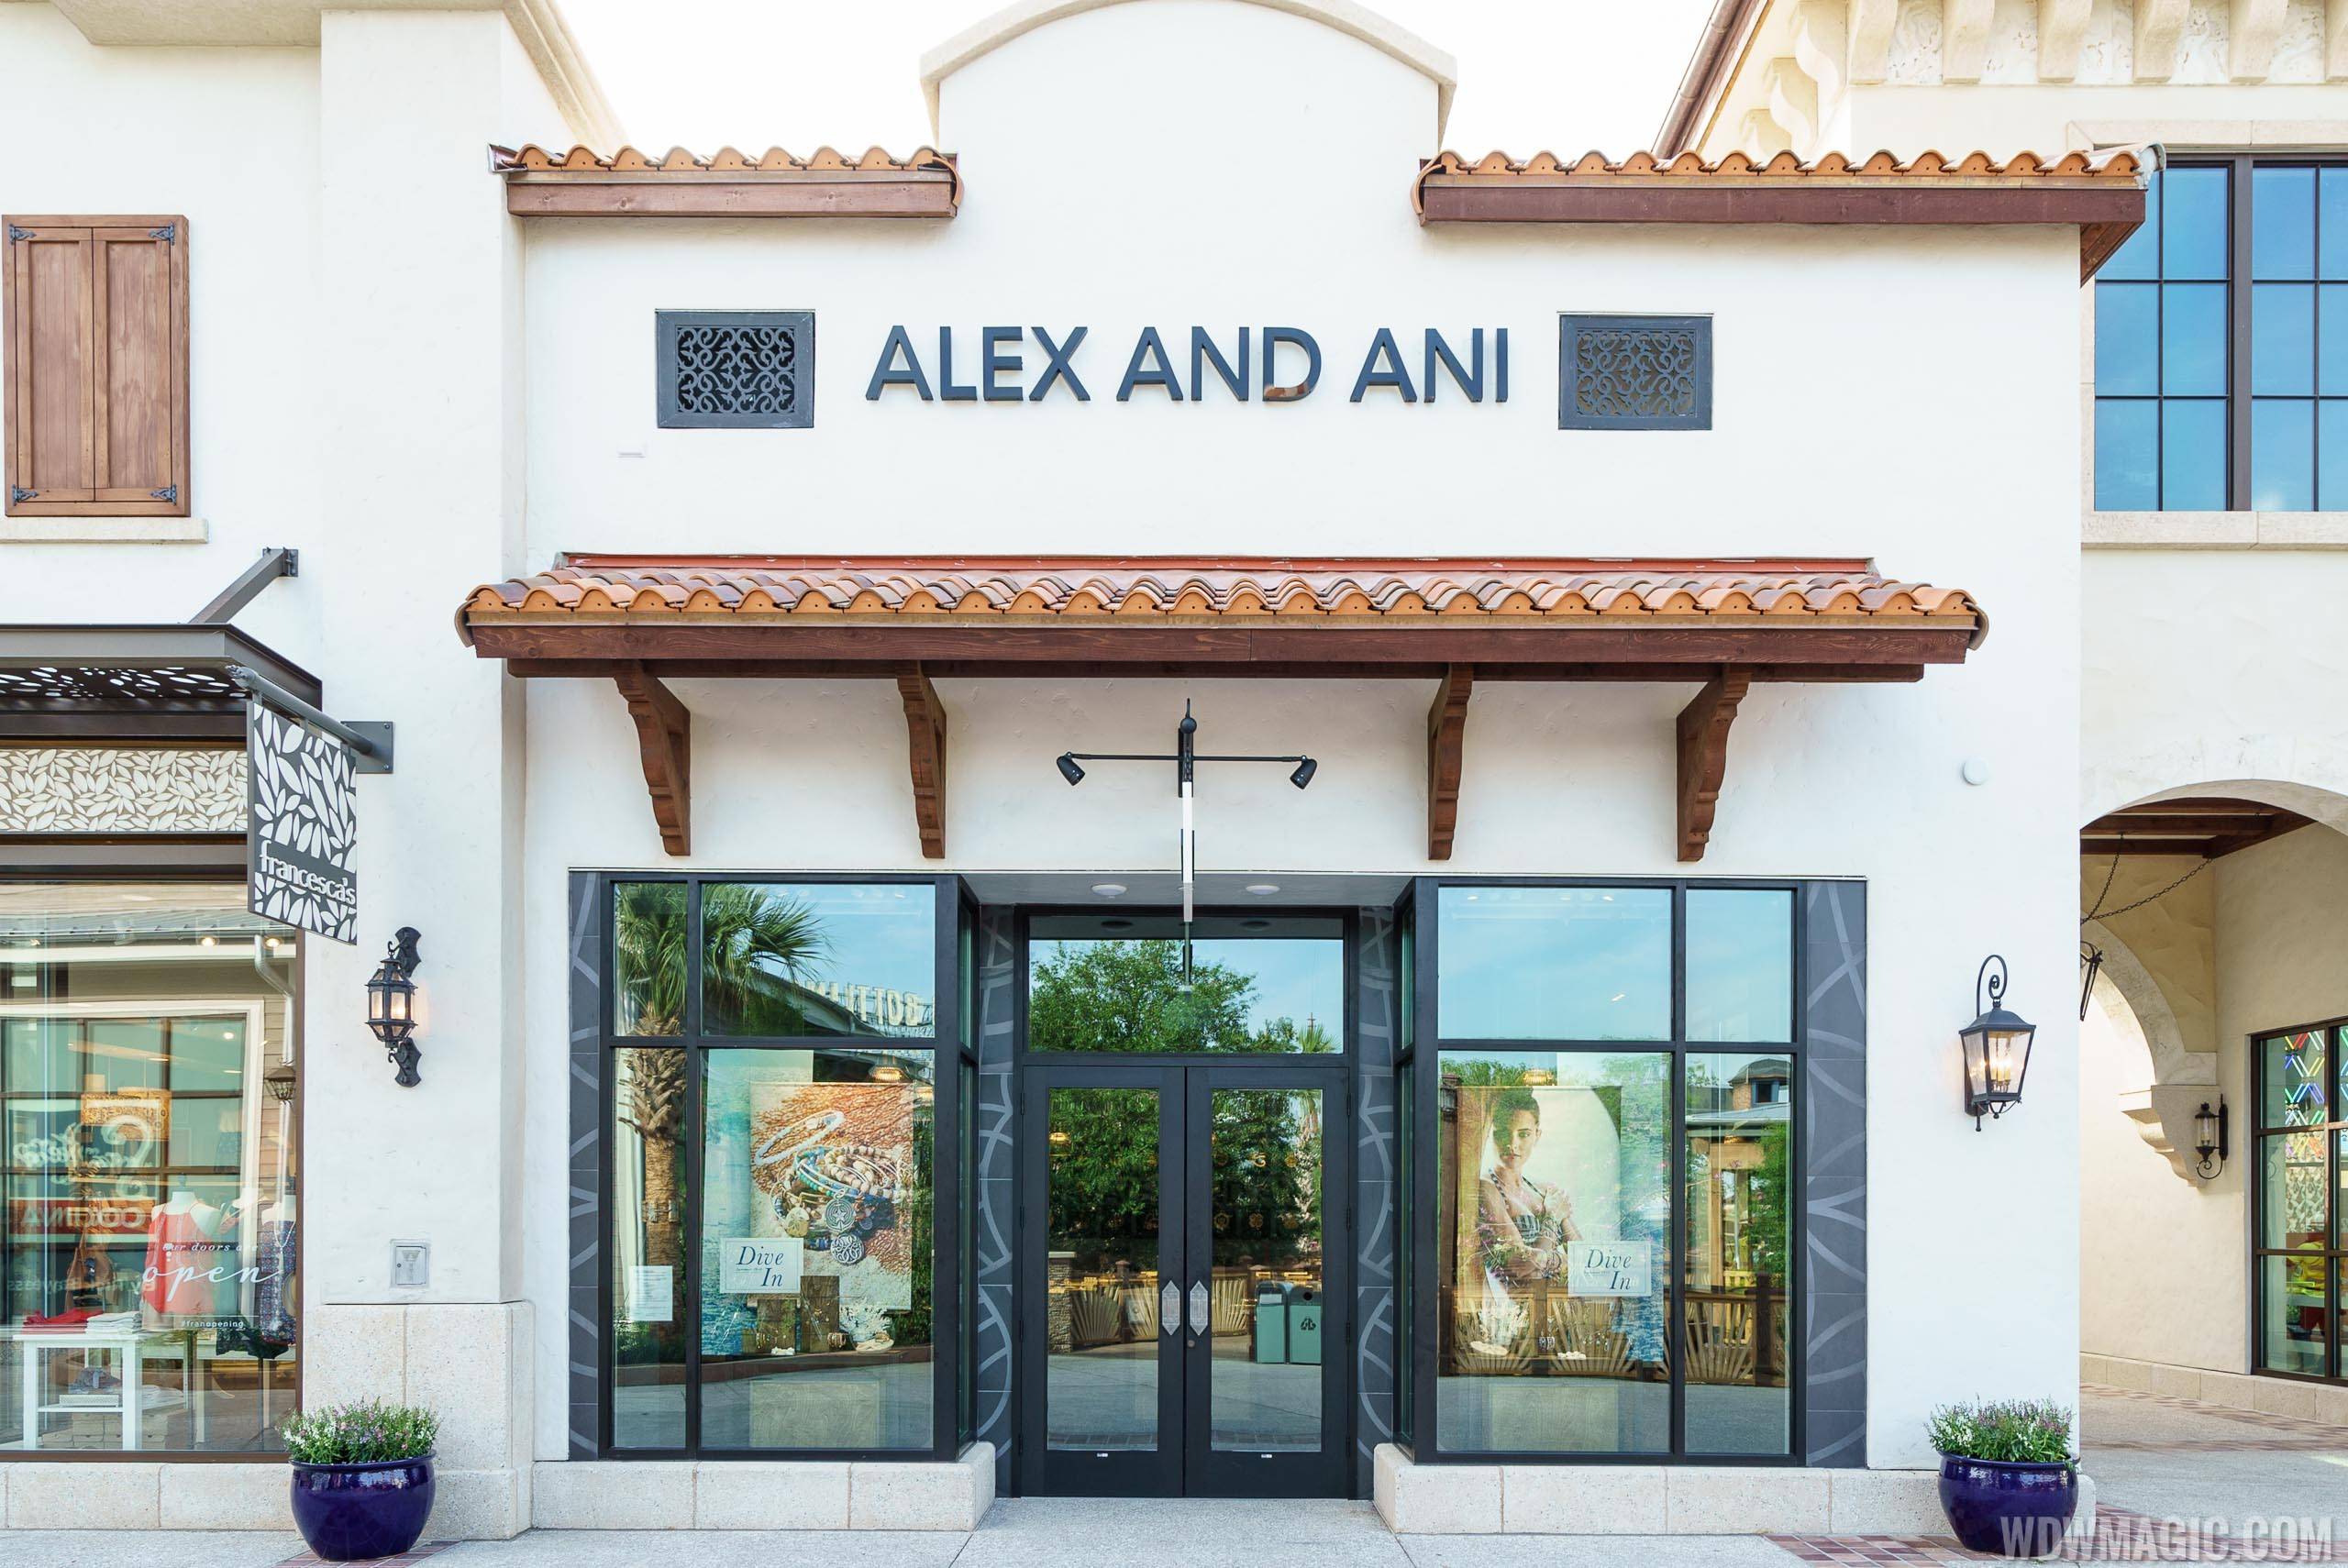 ALEX AND ANI at Disney Springs - Store front